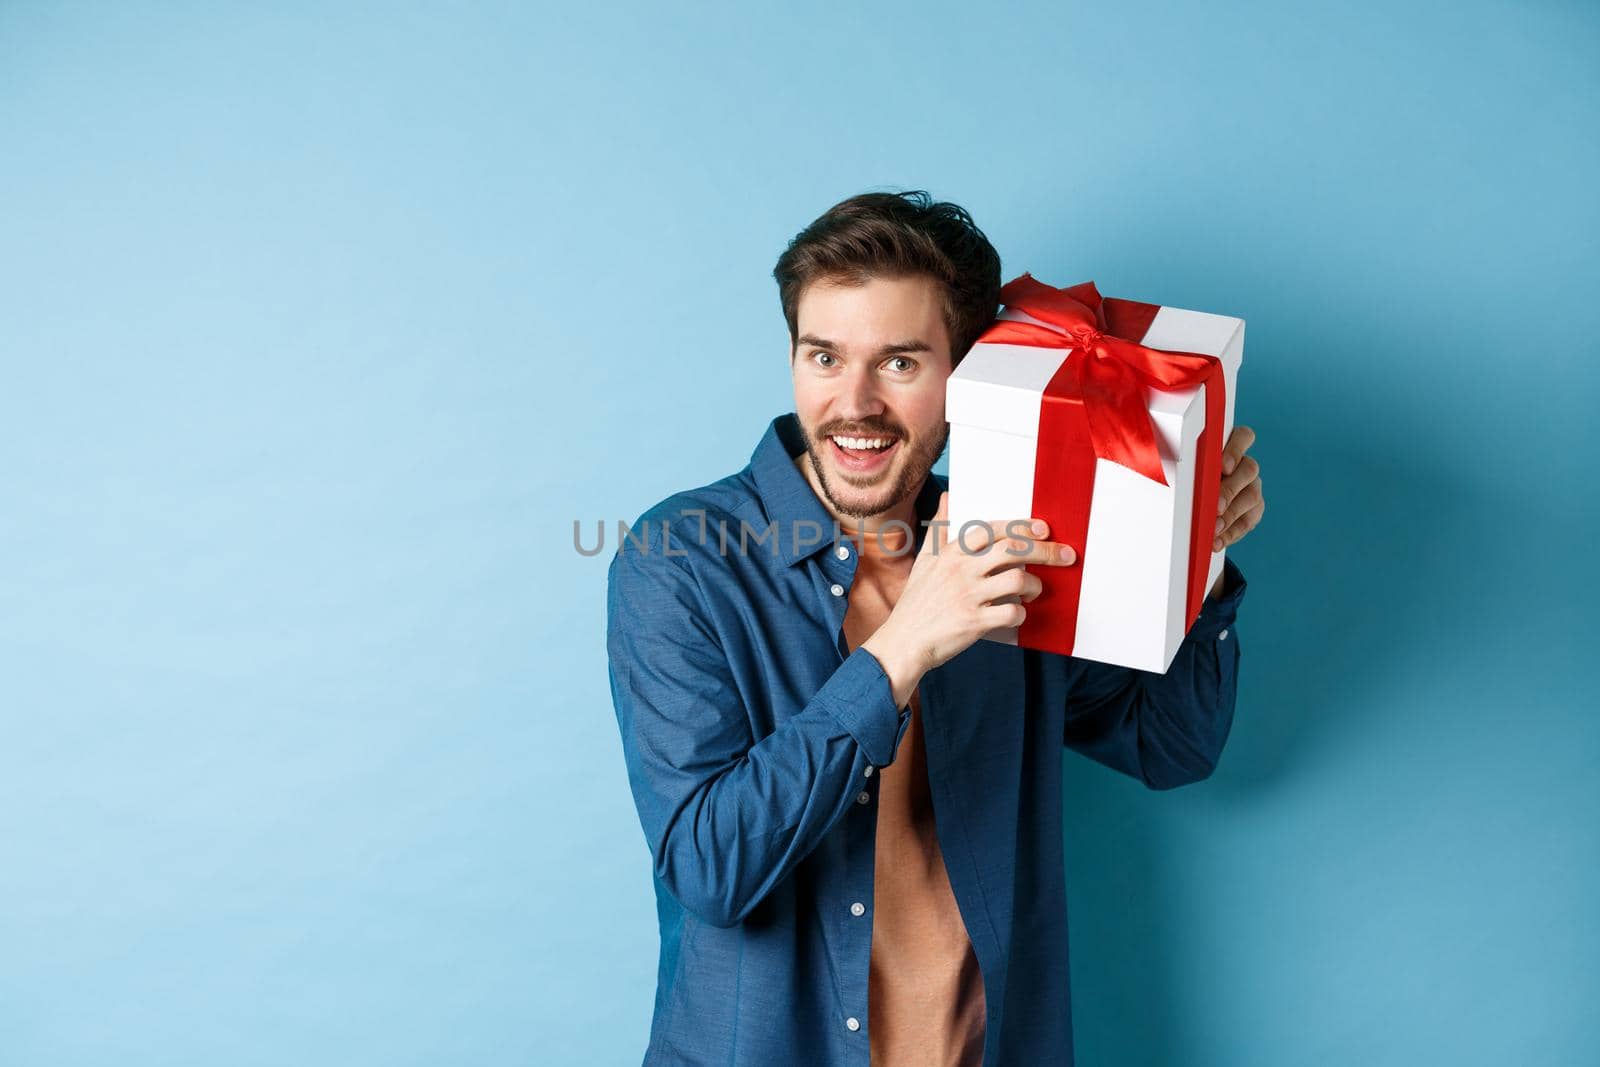 Valentines day. Happy young man got present on special holiday, trying guess what inside gift box and smiling, standing over blue background.